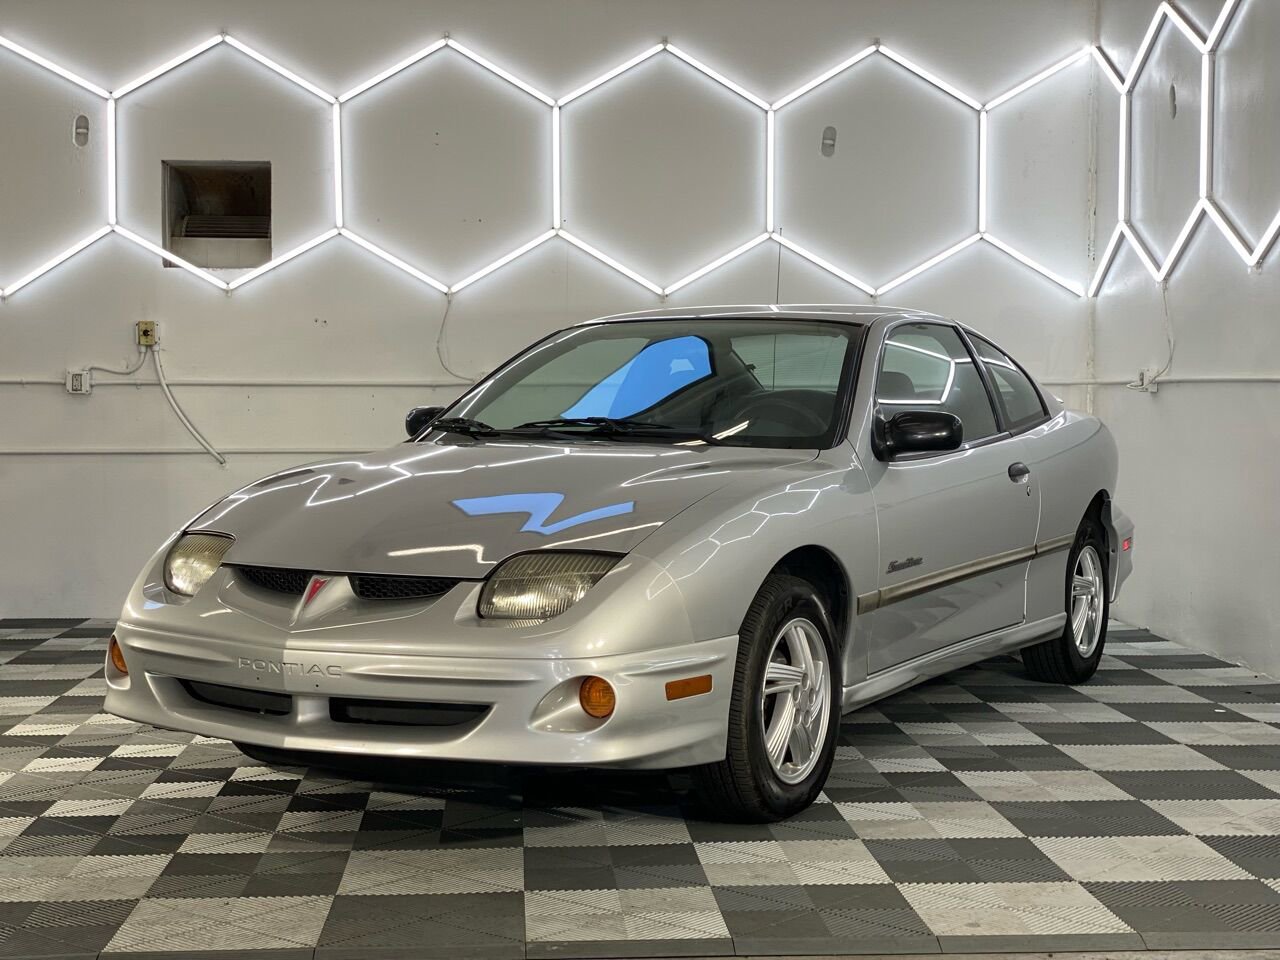 2000 Pontiac Sunfire for Sale (Test Drive at Home) - Kelley Blue Book